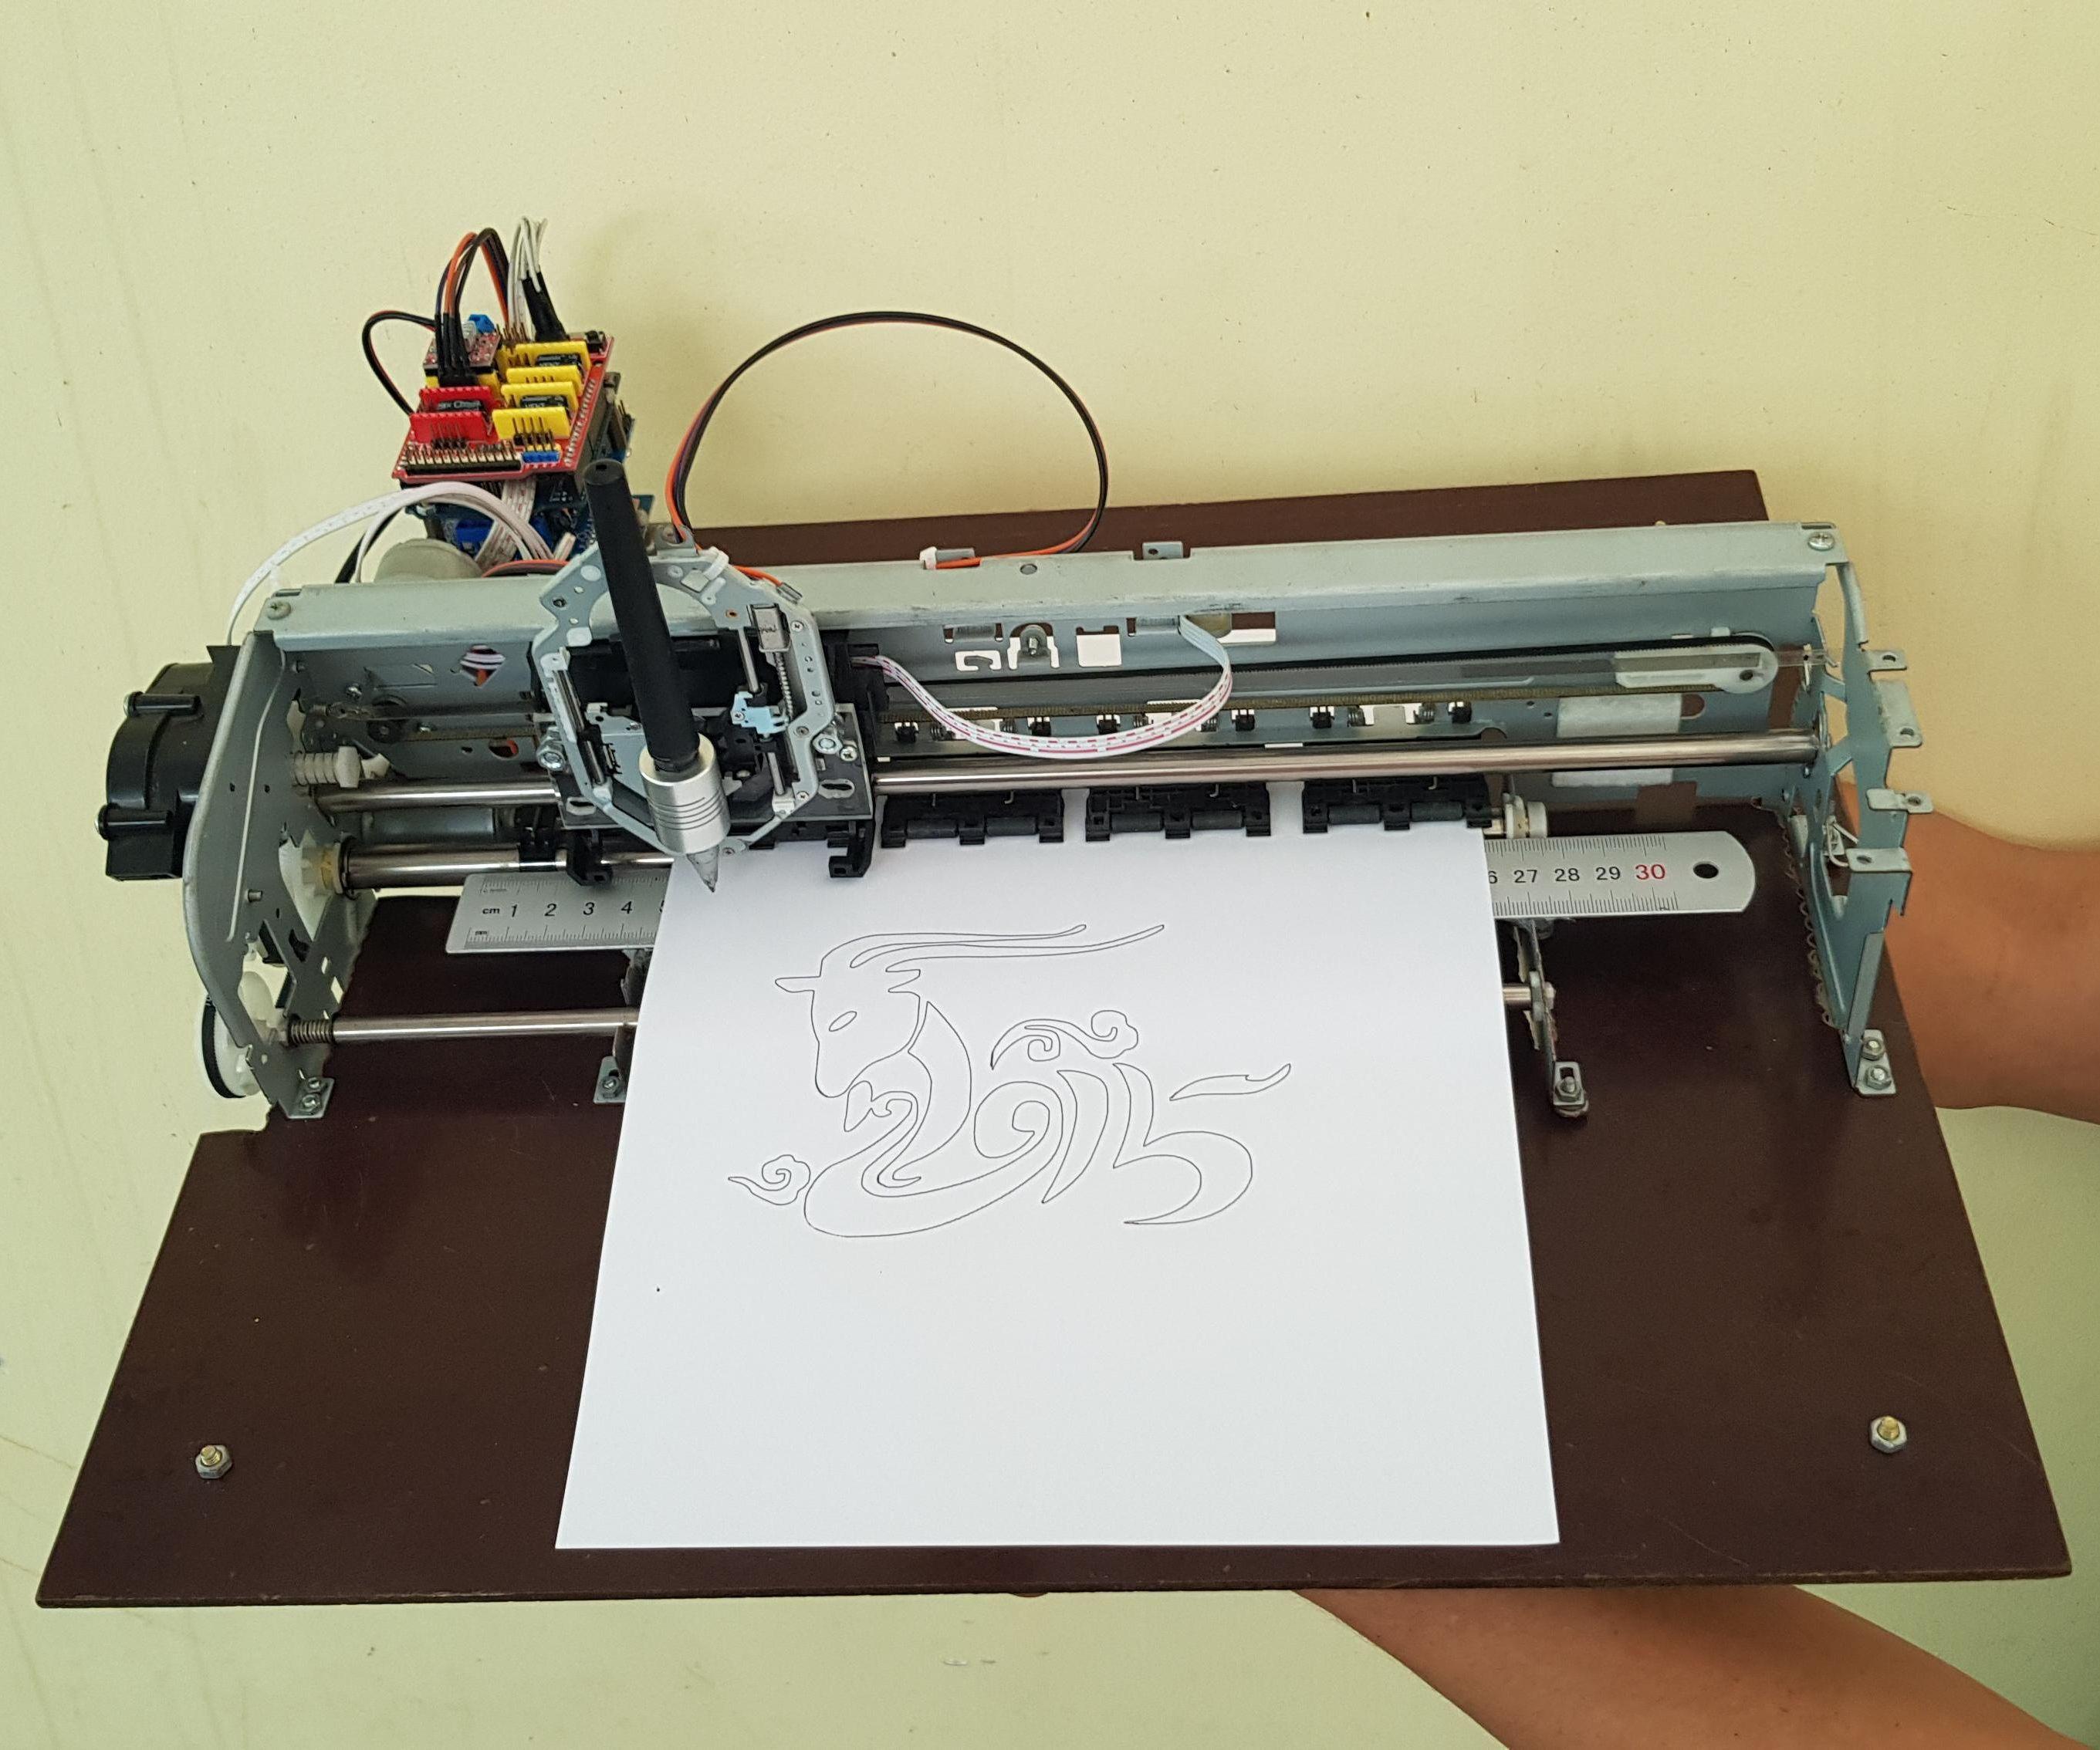 3 AXIS CNC PLOTTER FROM DC MOTORS AND OPTICAL ENCODERS